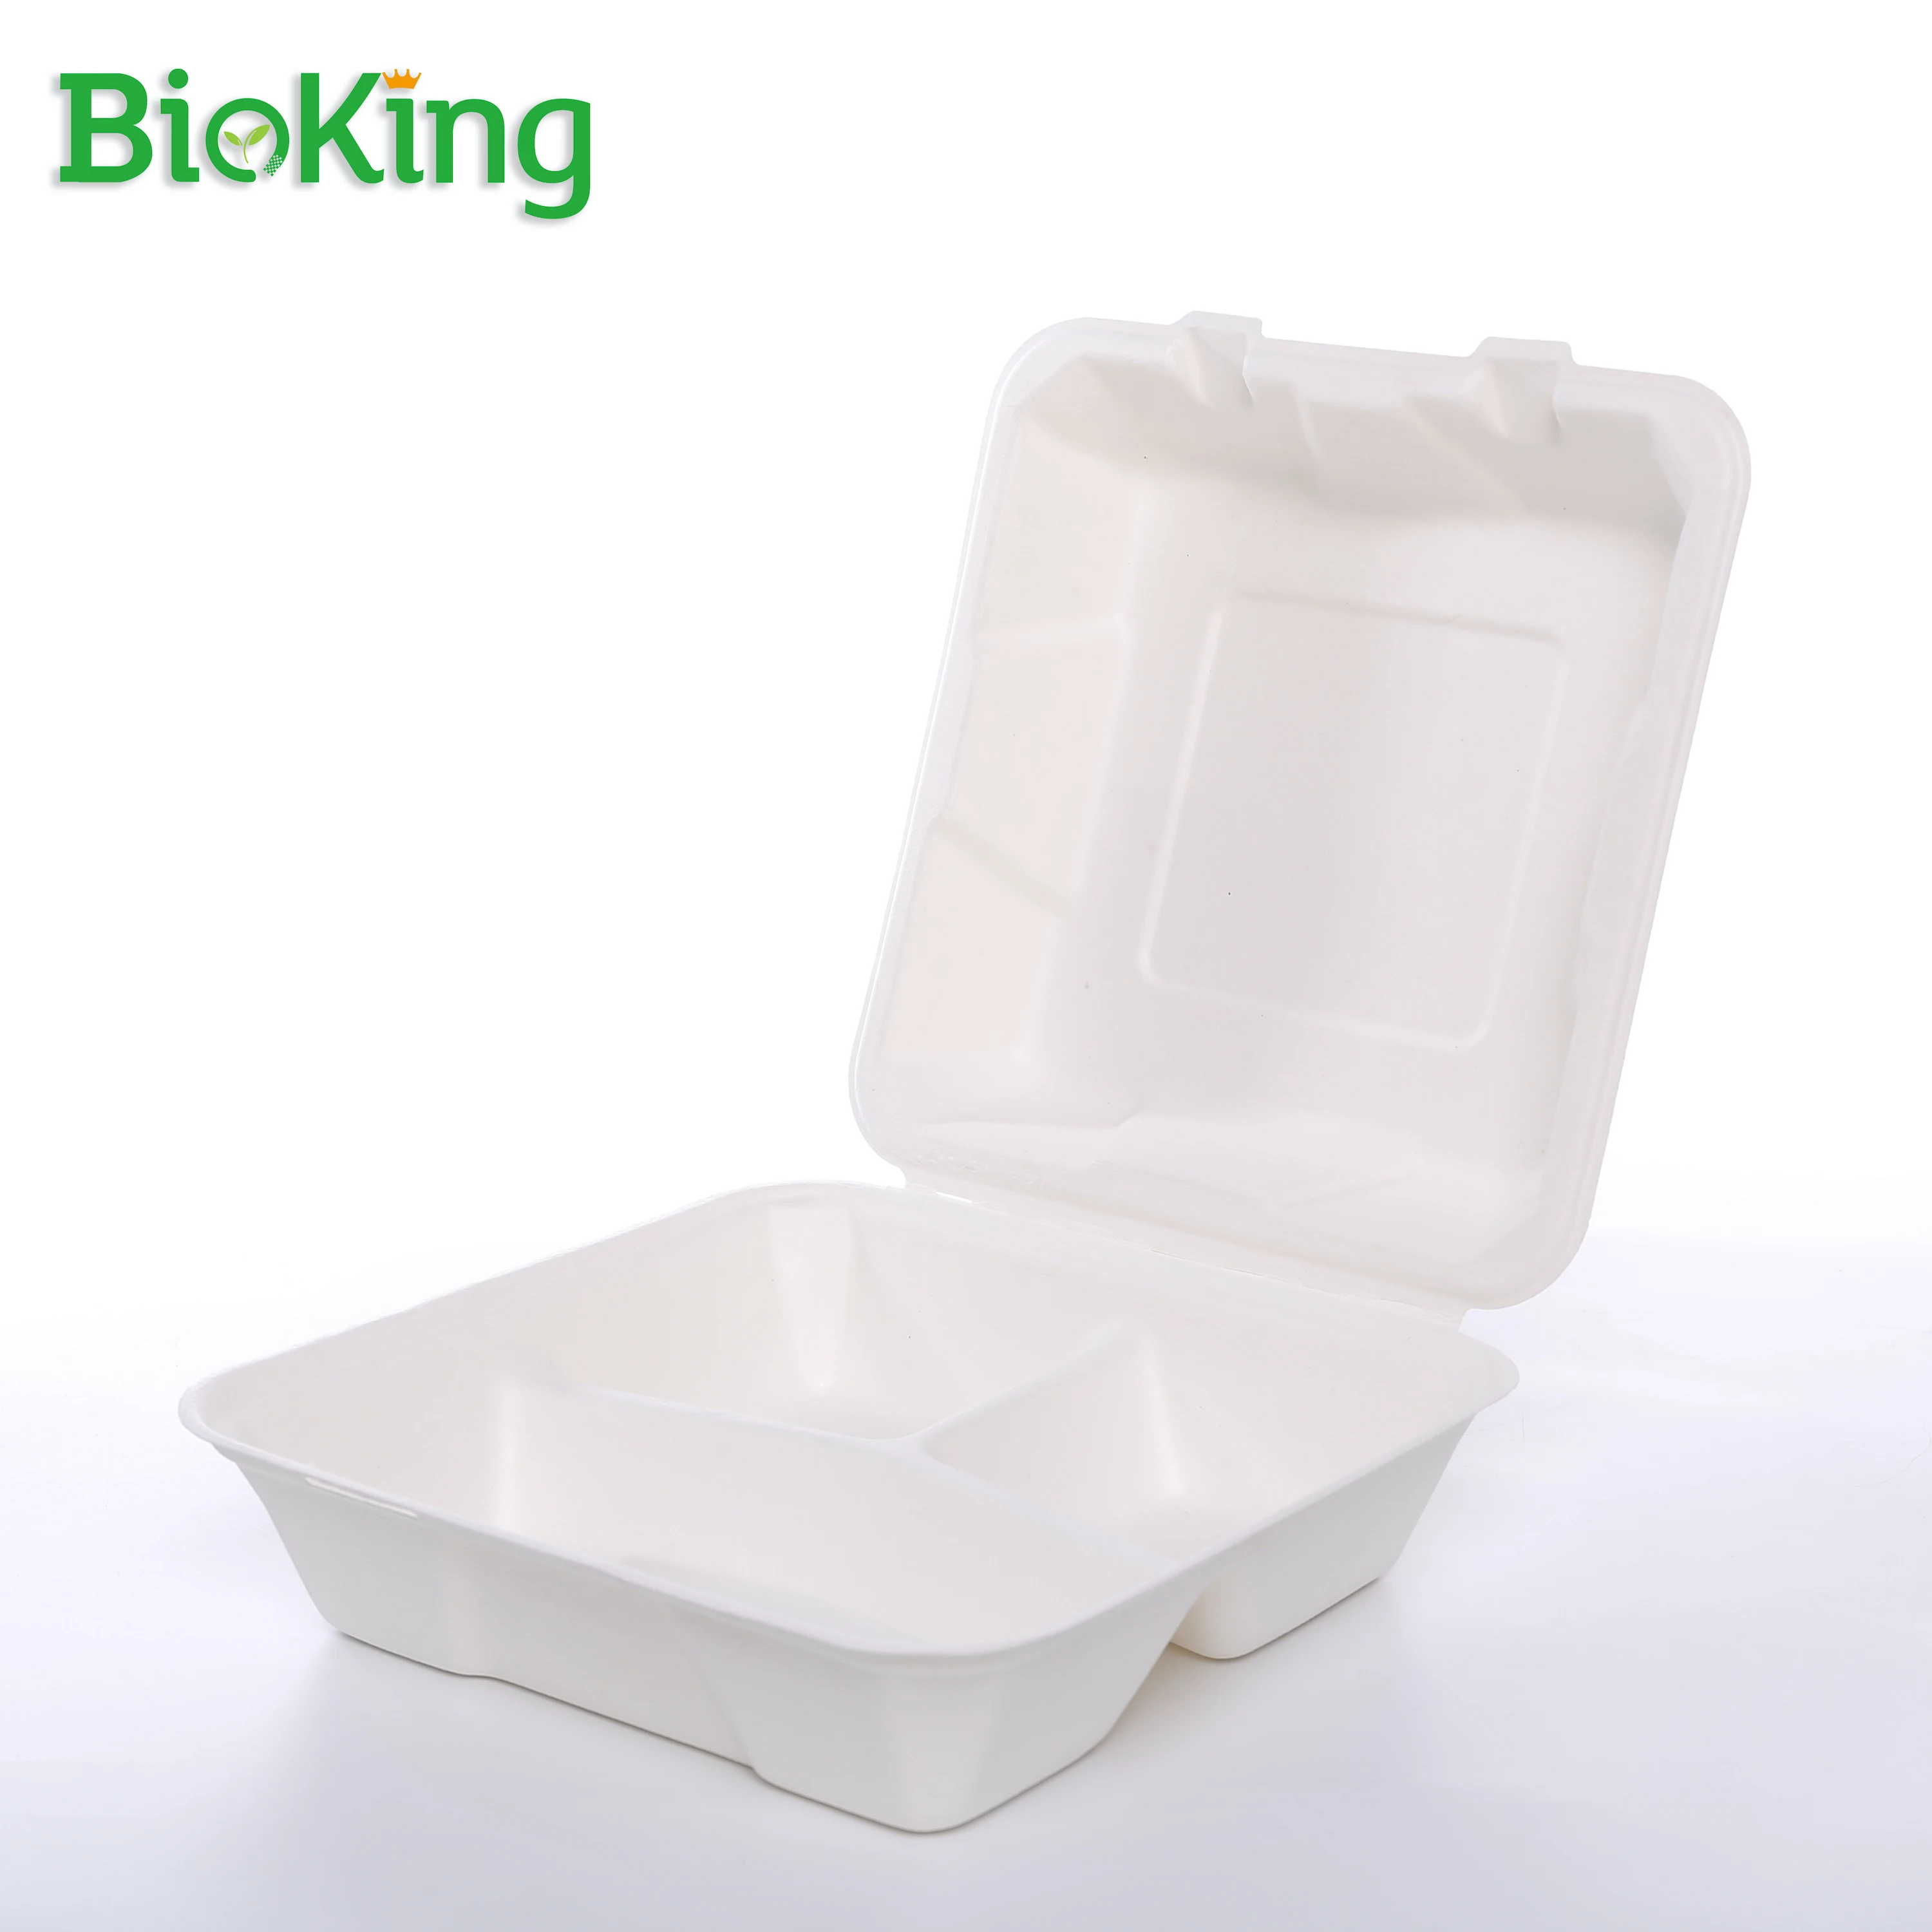 

BioKing sugarcane bagasse pulp biodegradable and compostable 8x8inch 3 compartment clamshell, Bleached;natural